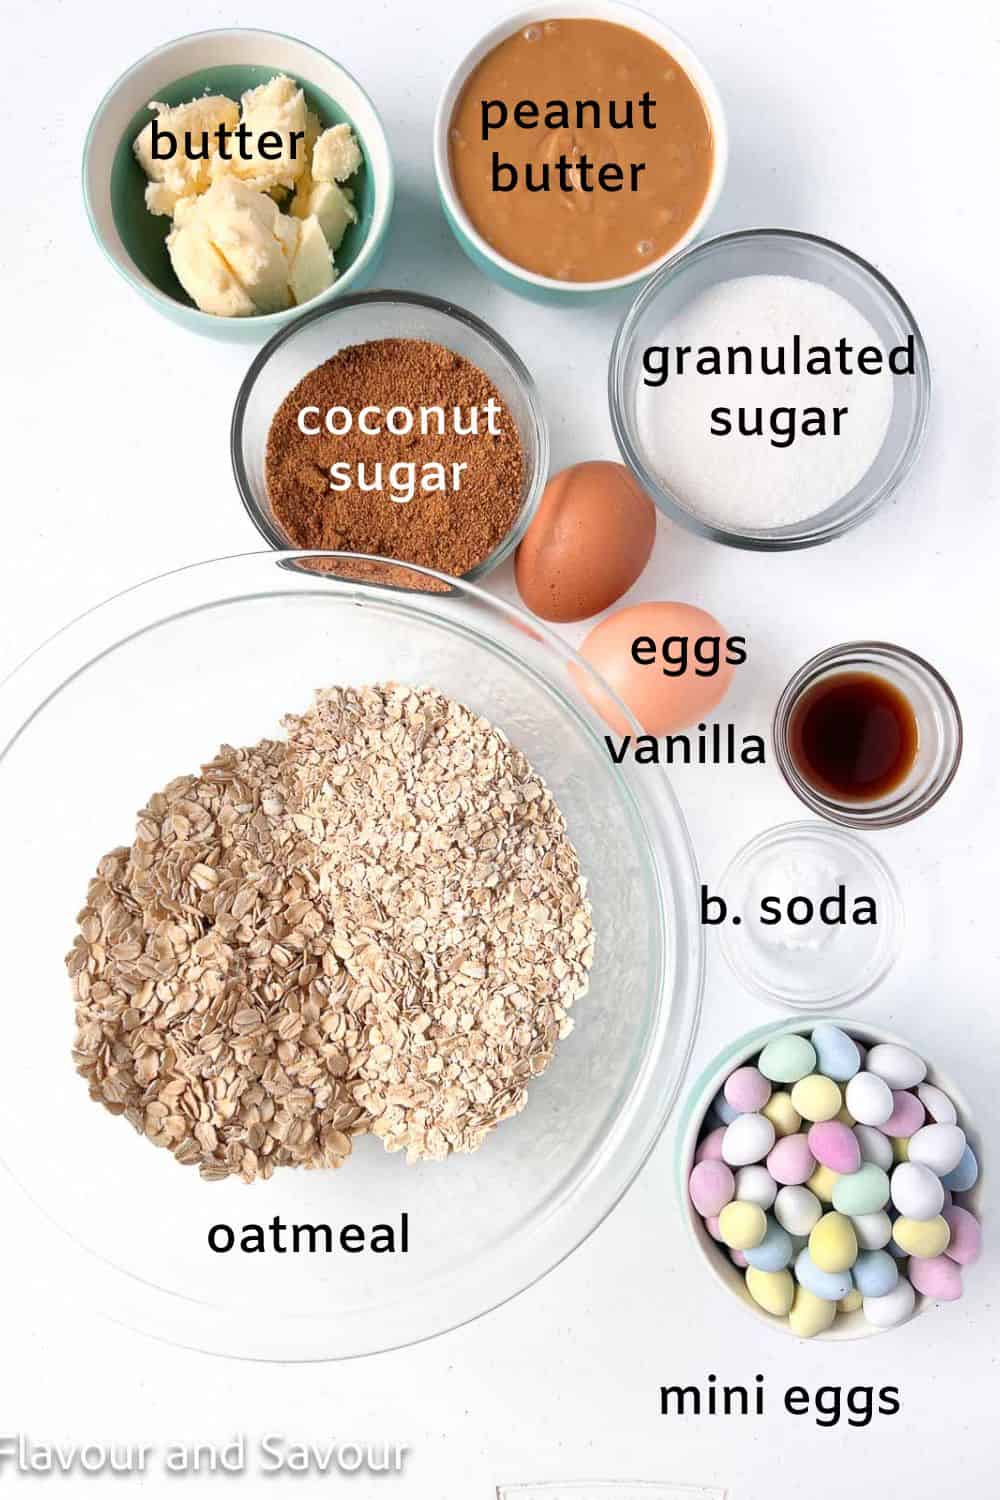 Labelled ingredients for mini egg oatmeal cookie bars: butter, peanut butter, coconut sugar, granulated sugar, eggs, vanilla, oatmeal, baking soda, candy-coated mini chocolate eggs.